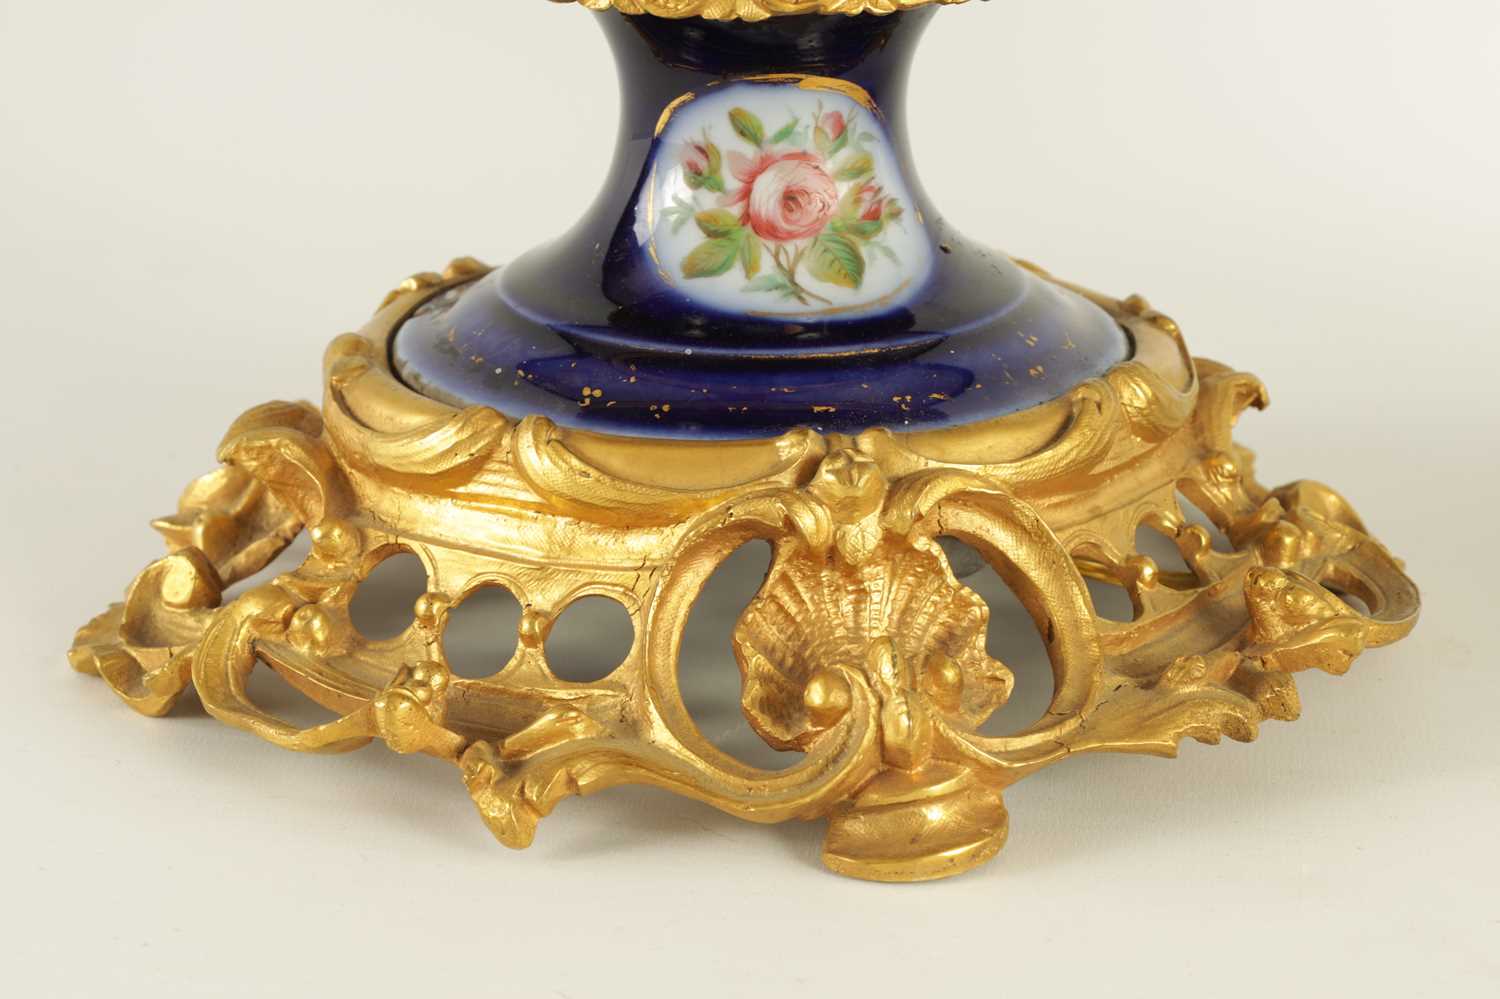 A PAIR OF 19TH CENTURY CONTINENTAL ORMOLU MOUNTED PORCELAIN LAMP BASES - Image 9 of 13